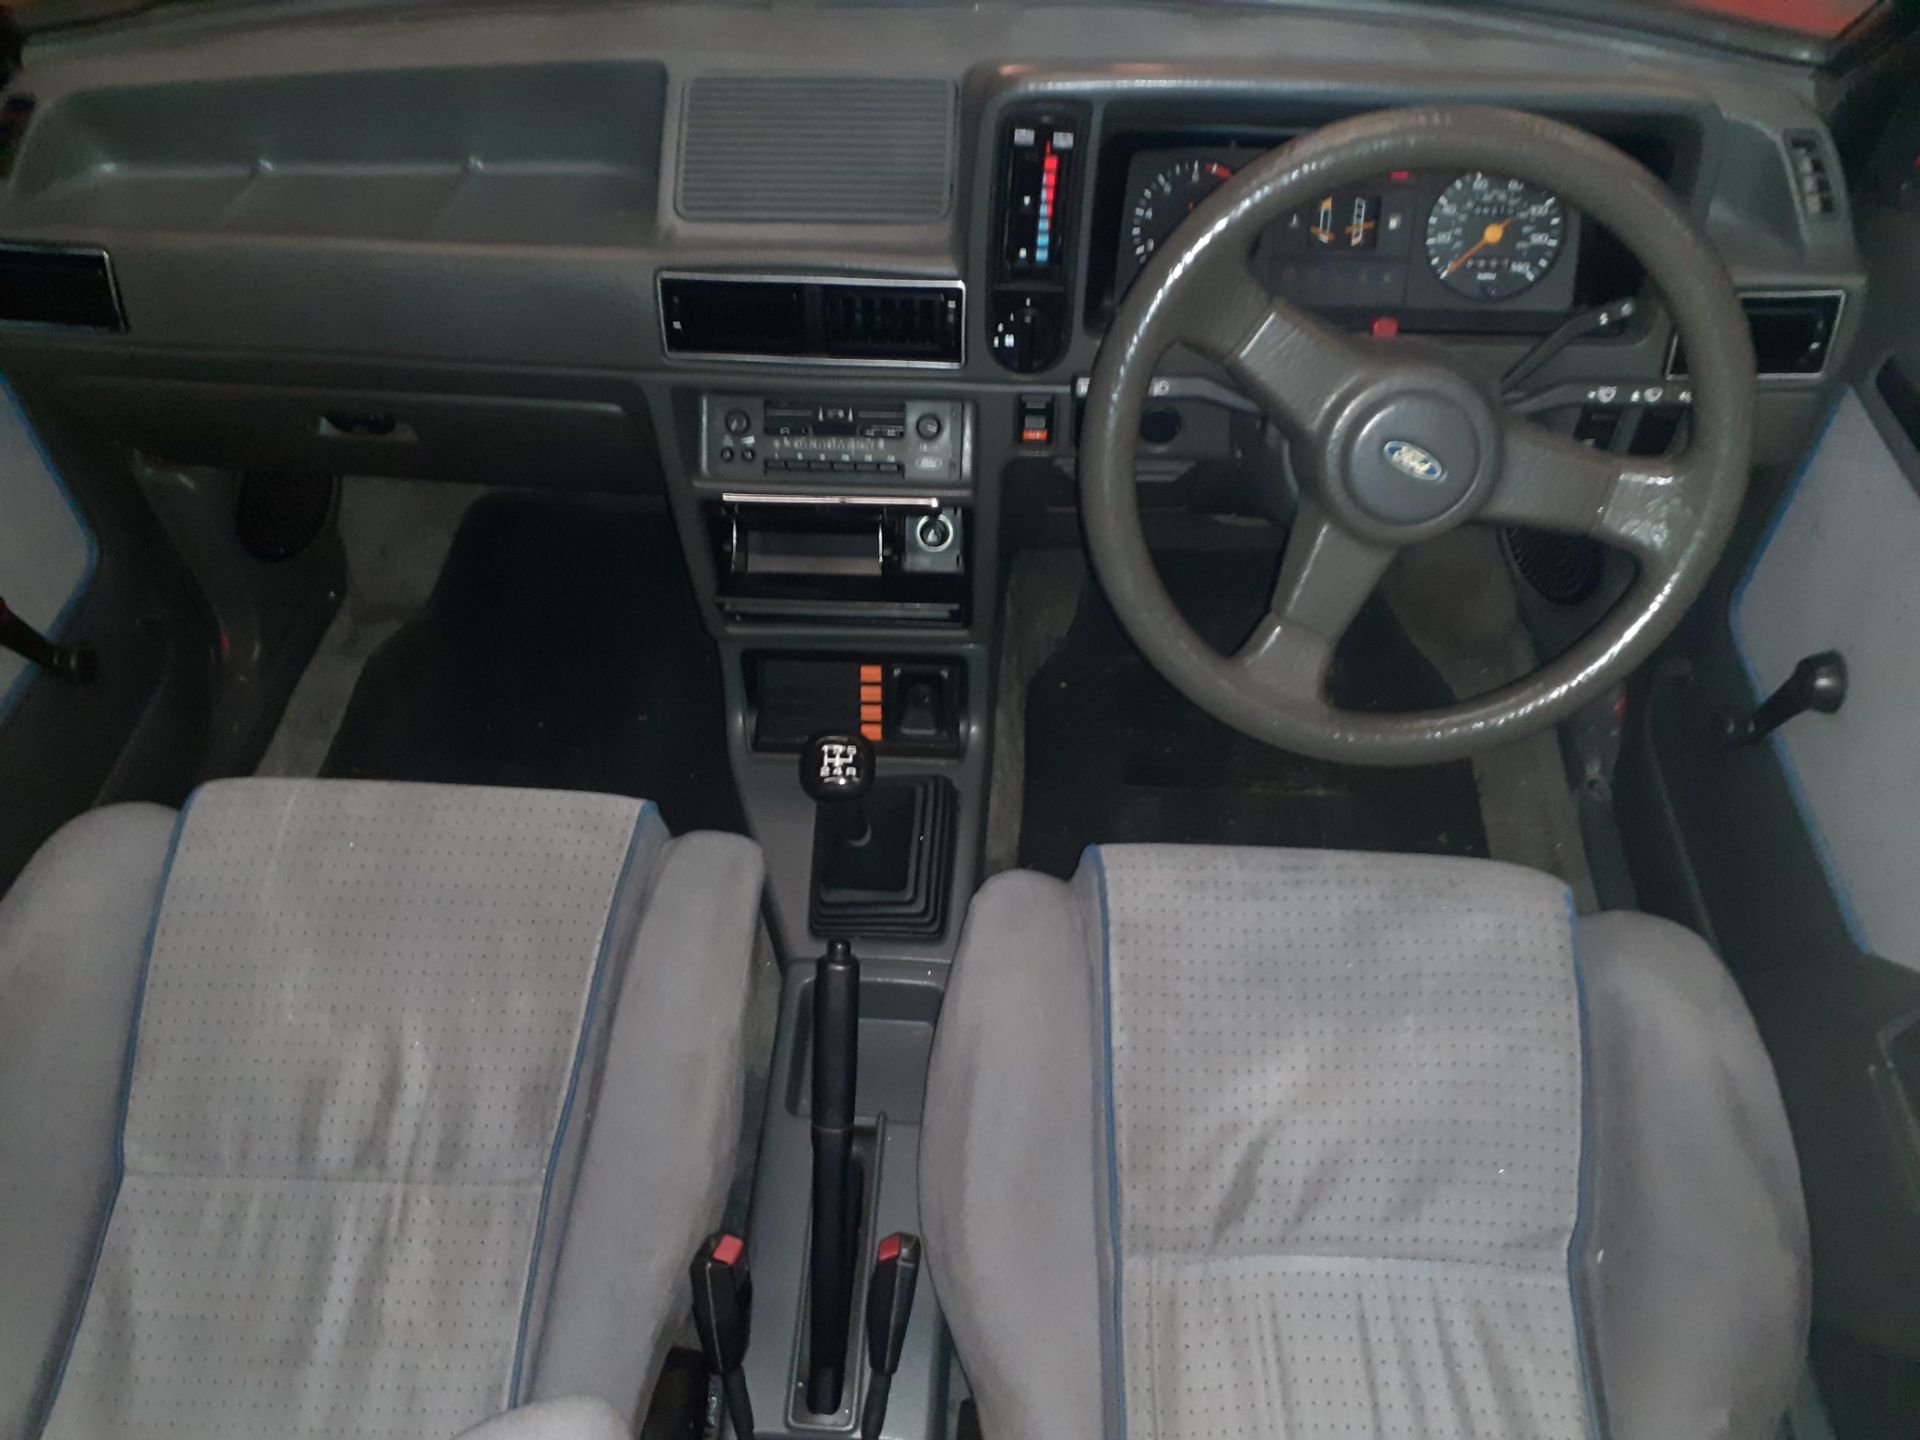 Ford Escort 1.6i Cabriolet, (1986), vendors comments - runs drives good condition, some spare - Image 12 of 26